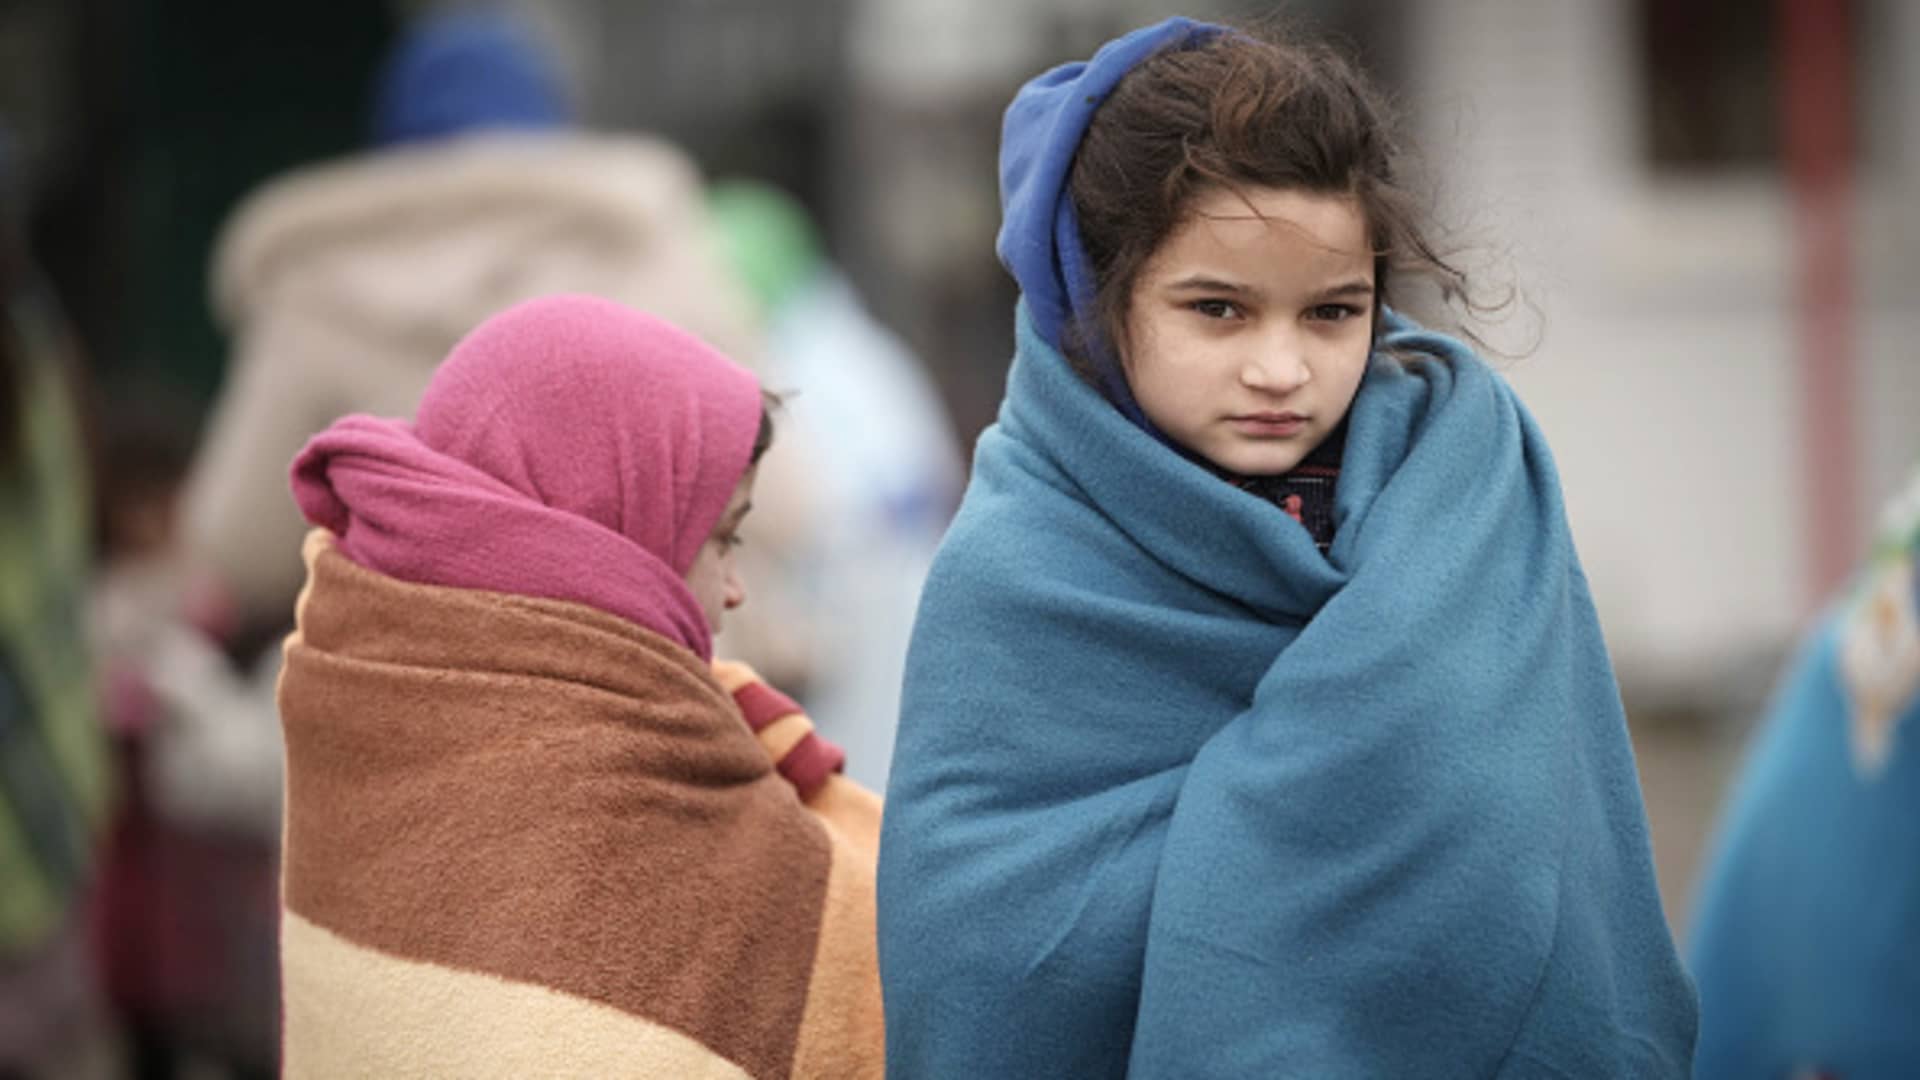 Refugee children fleeing Ukraine were given blankets by Slovakian rescue workers to keep warm at the Velke Slemence border crossing on March 9, 2022, in Slovakia.